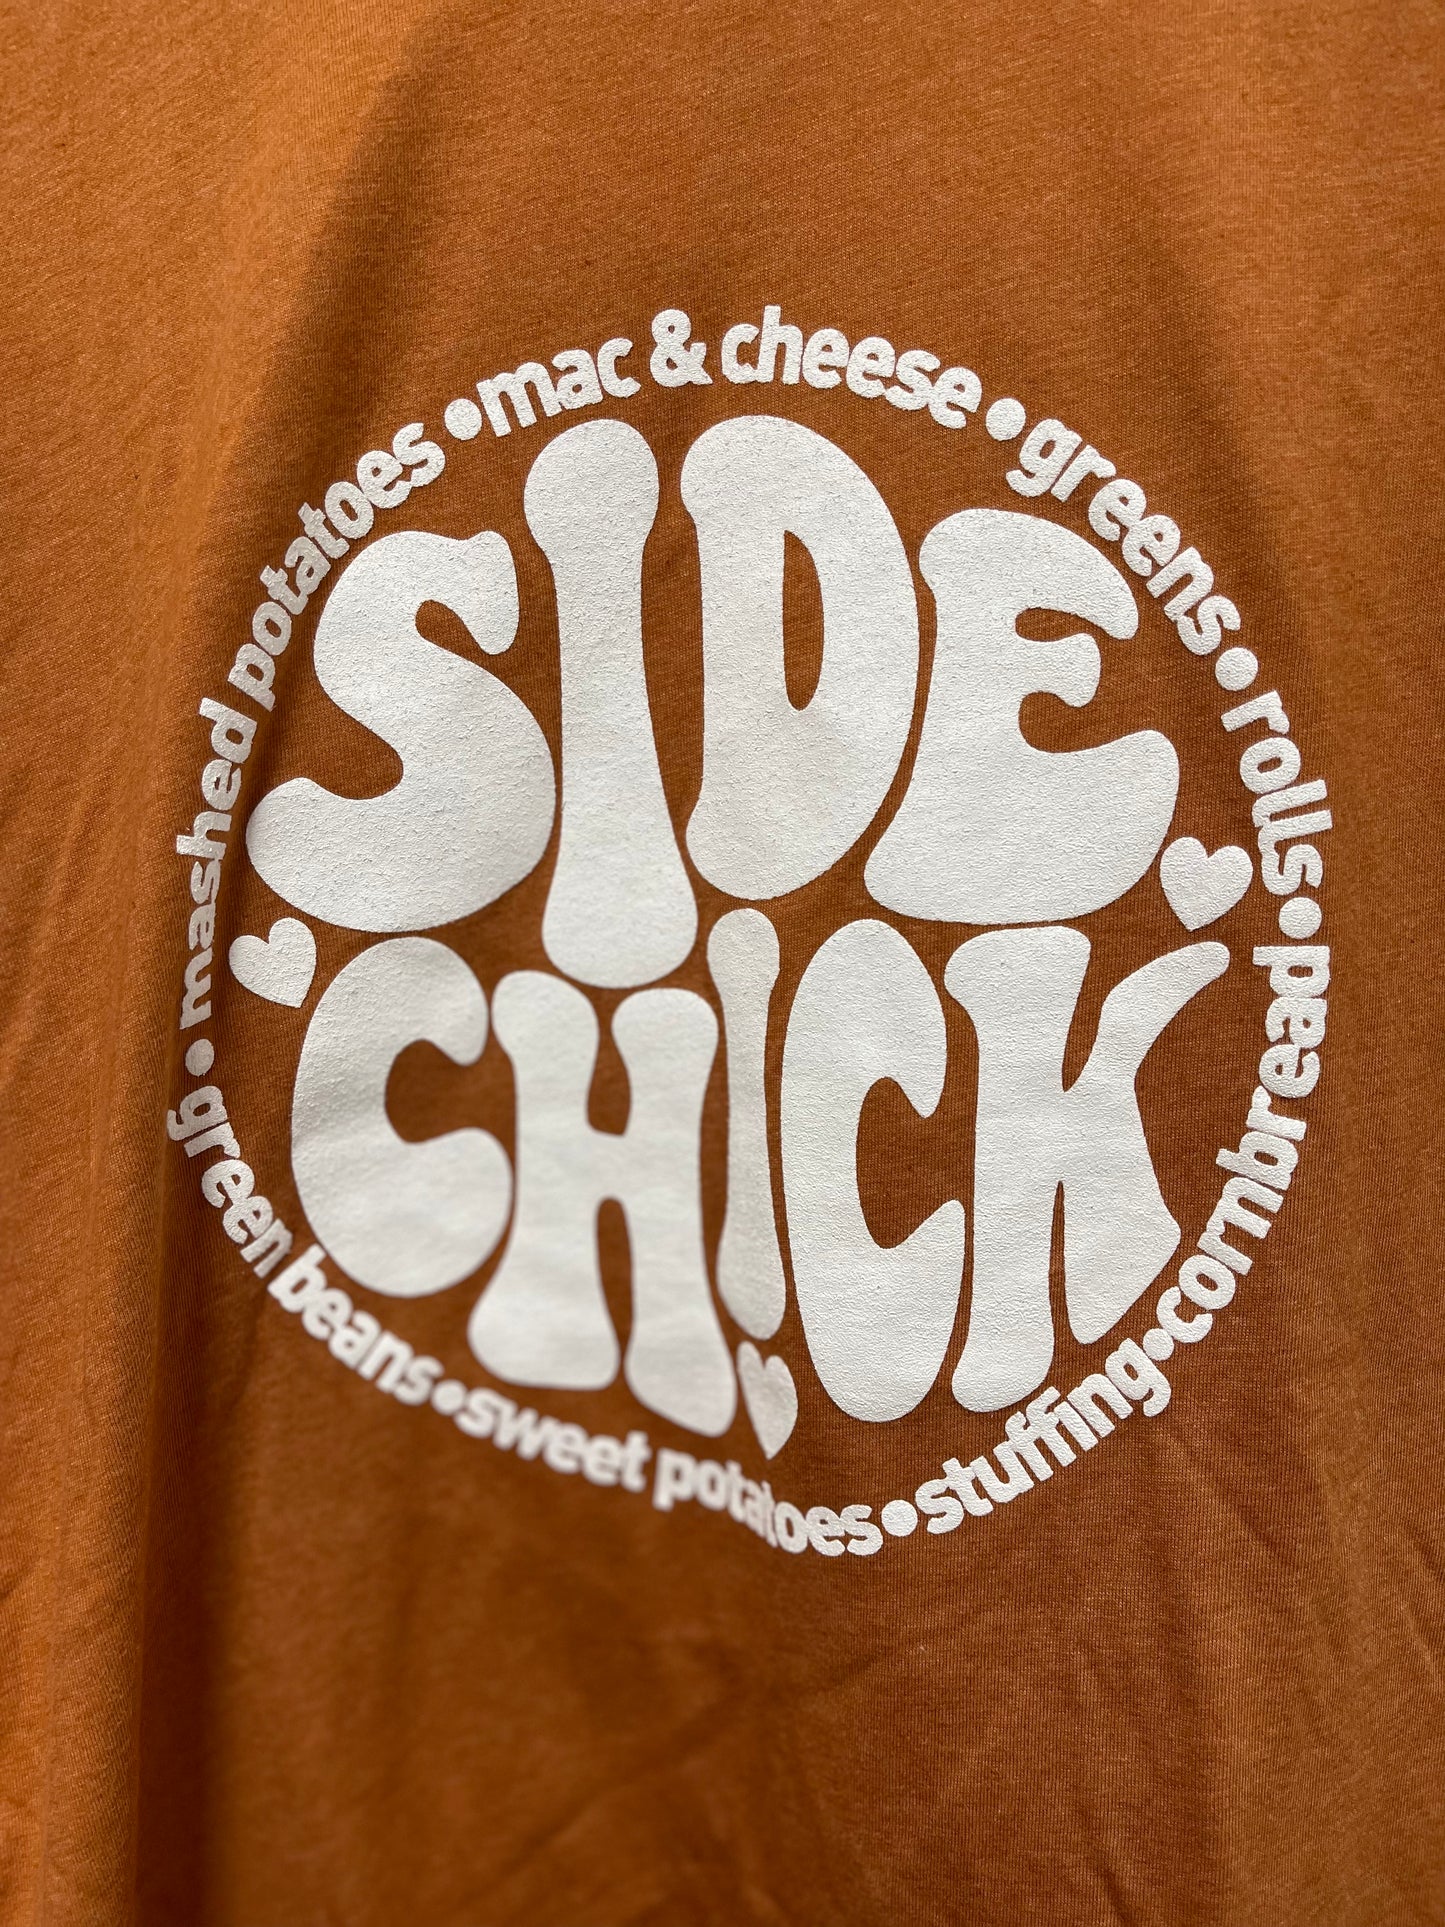 Side Chick Thanksgiving Tee